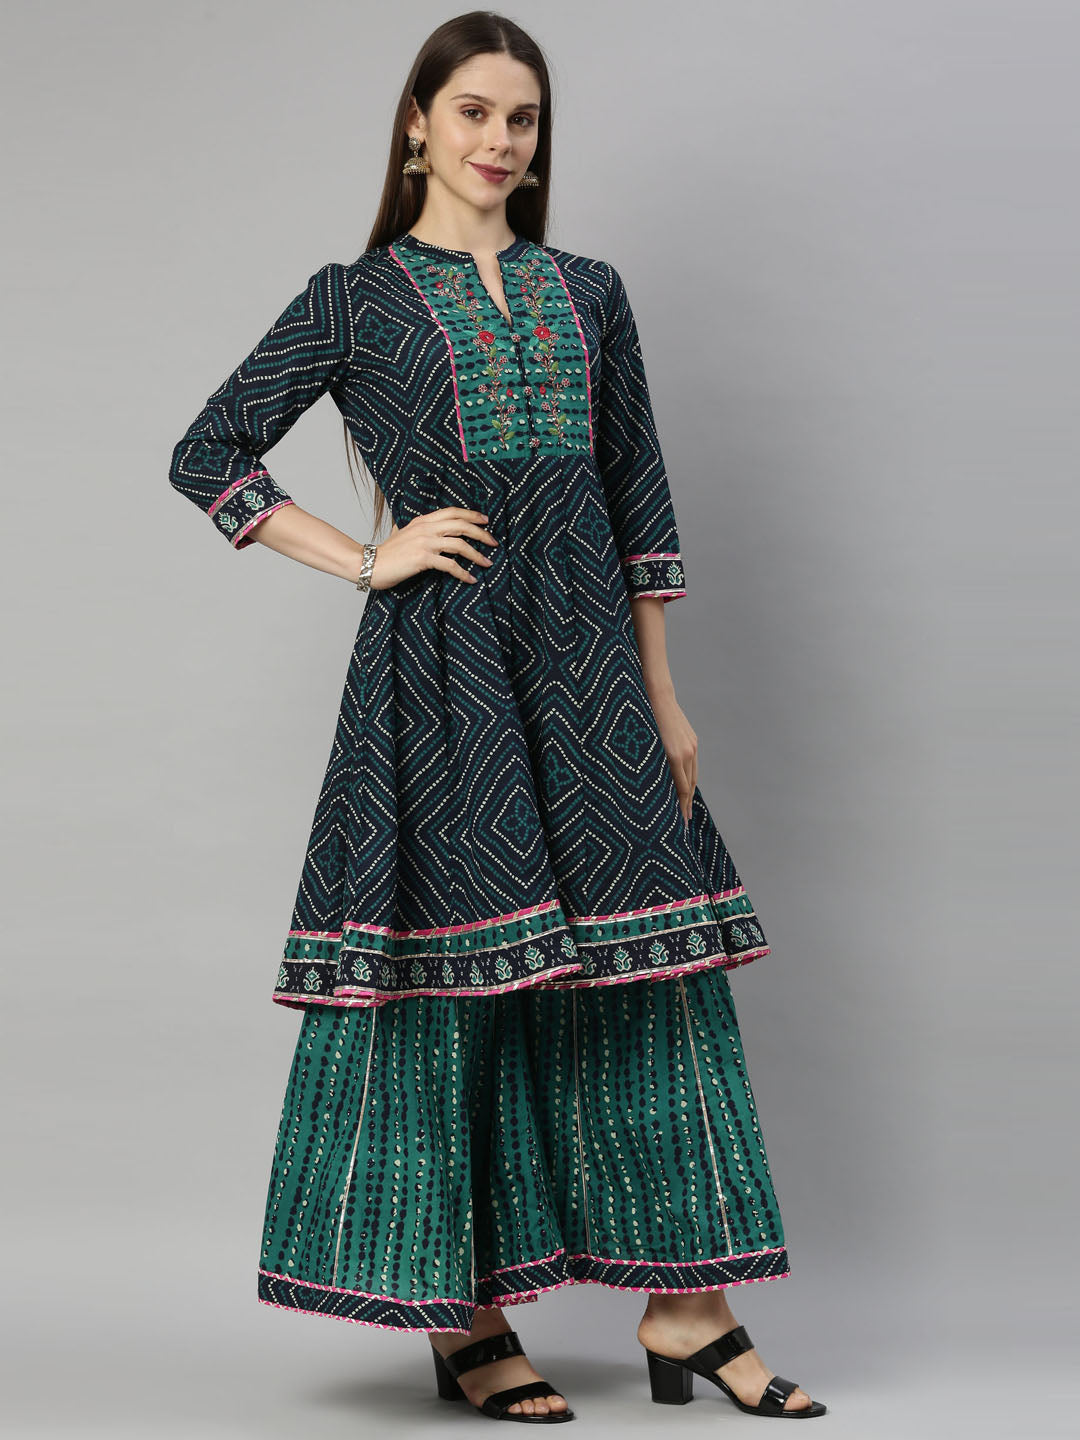 Neeru'S Navy Blue Color, Cotton Fabric Suit Printed